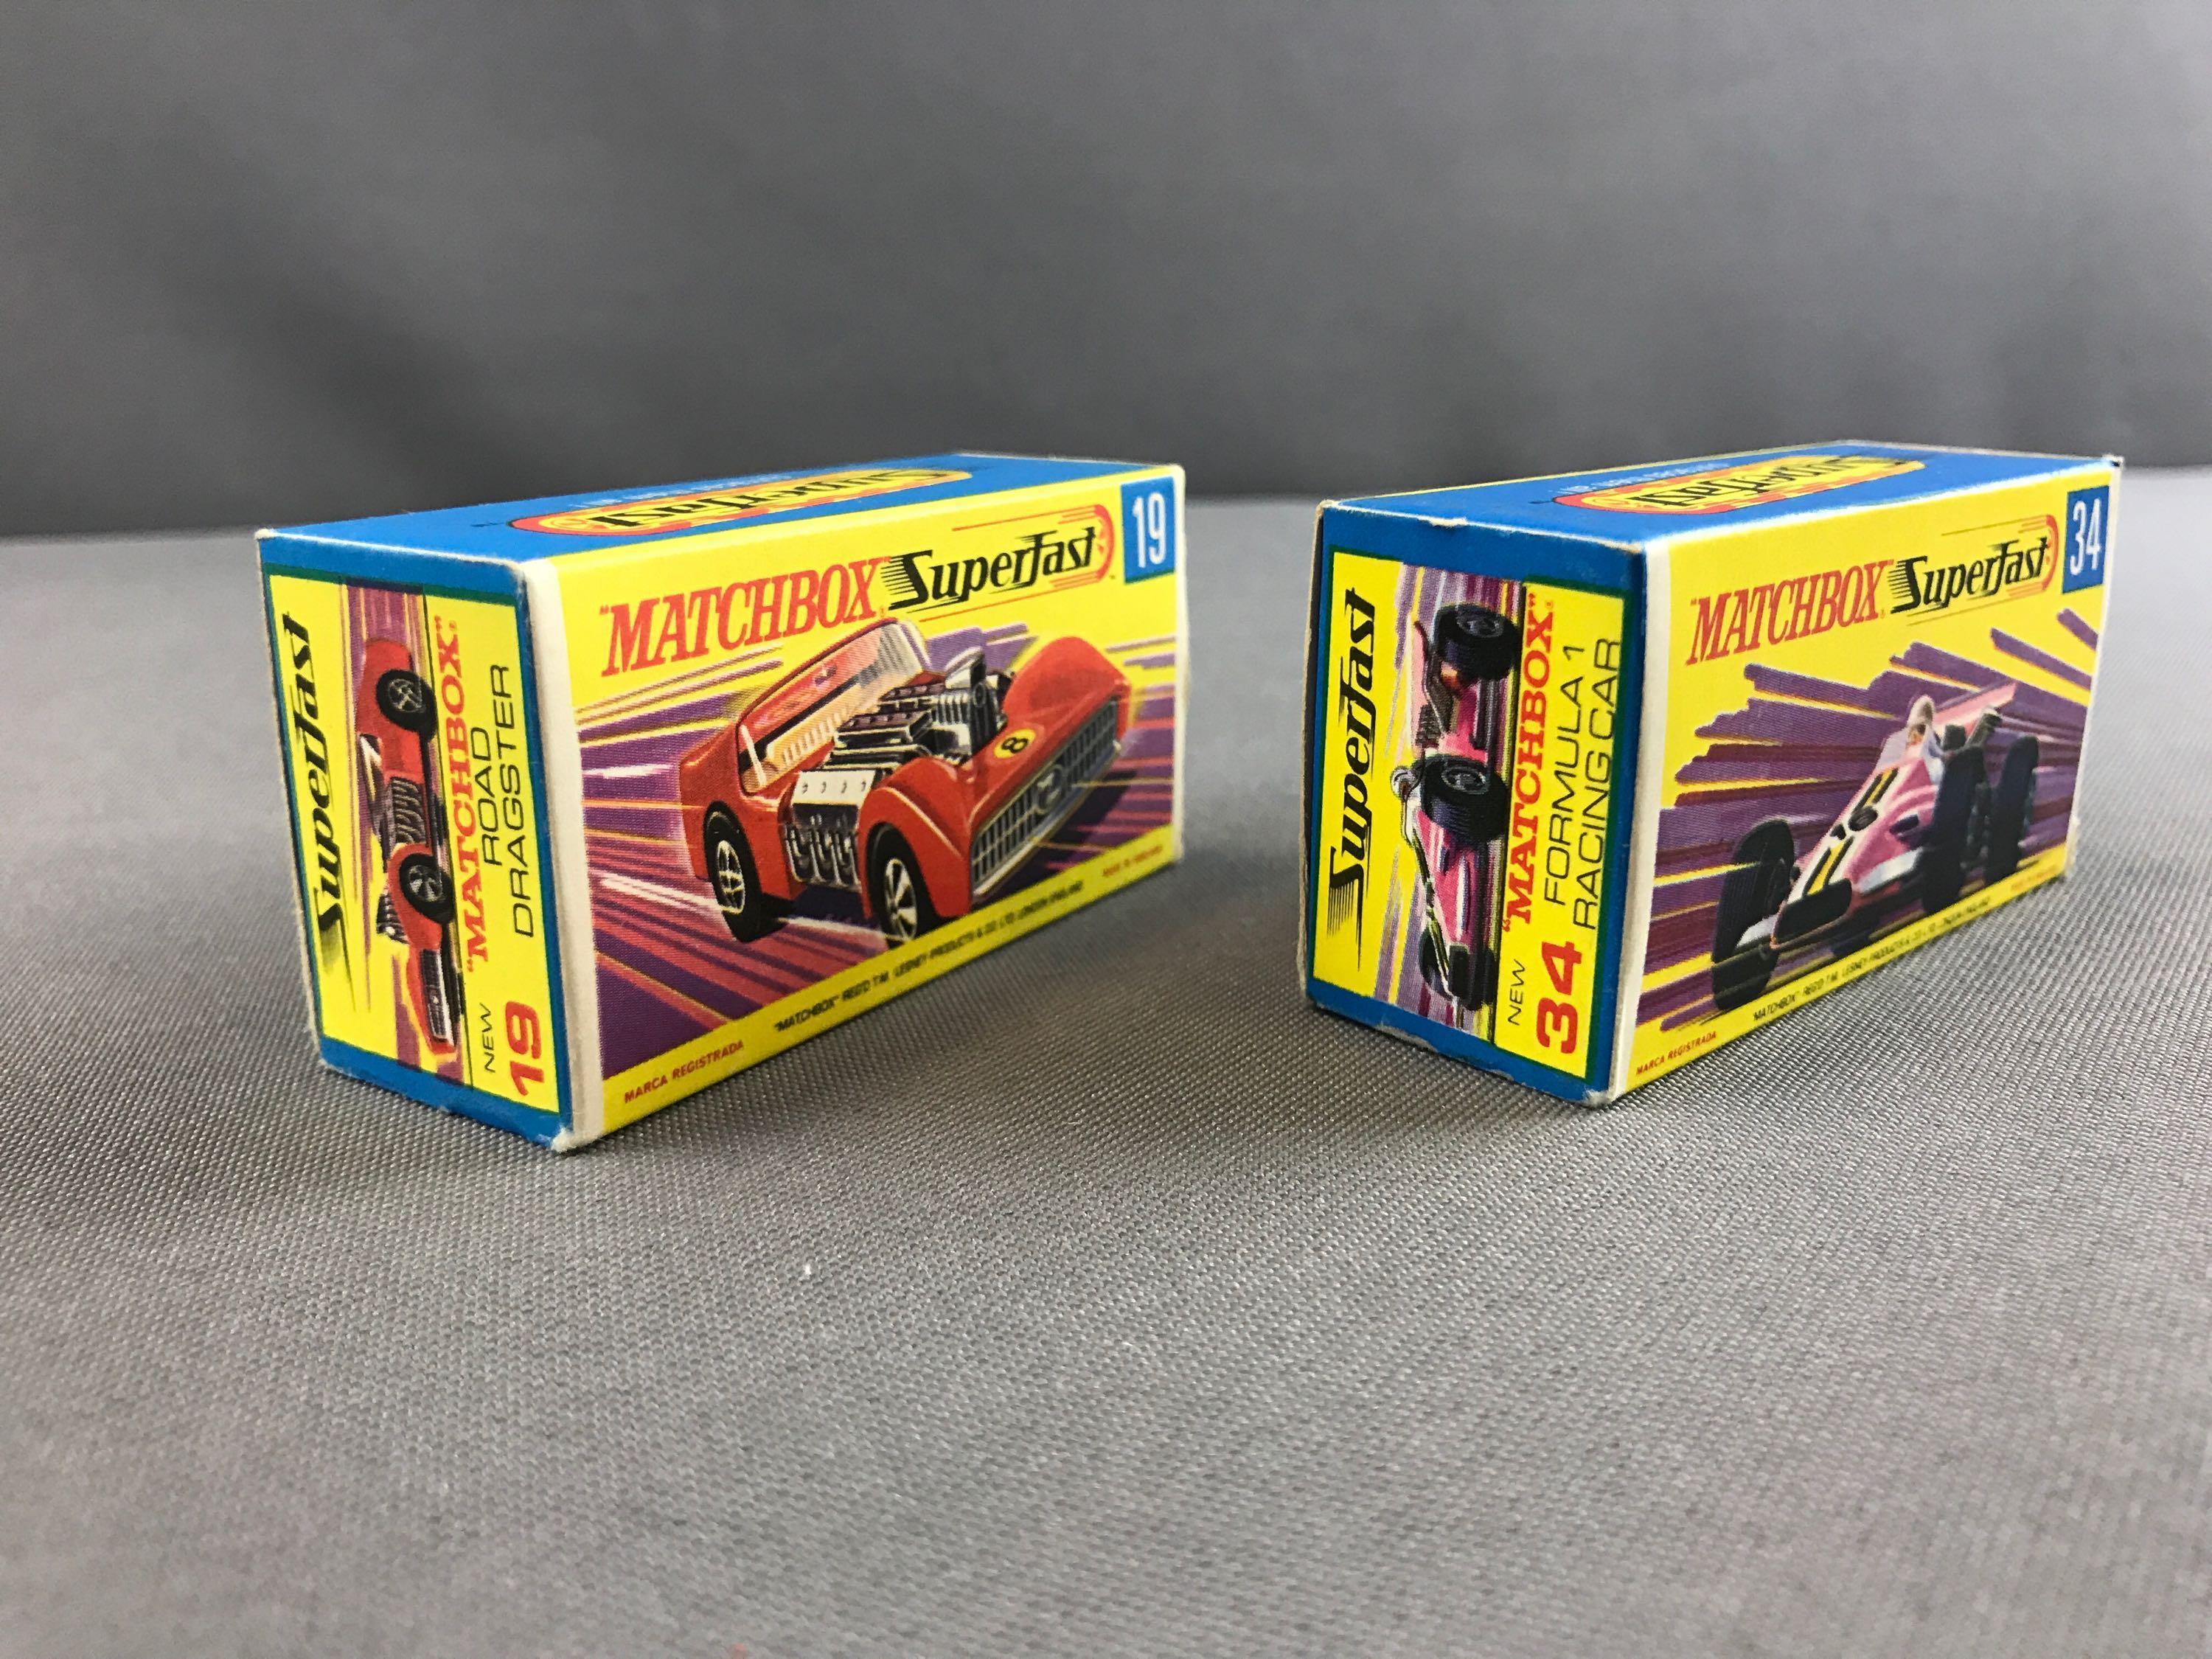 Group of 2 Matchbox Superfast die cast vehicles No. 19 and 34 with Original Boxes